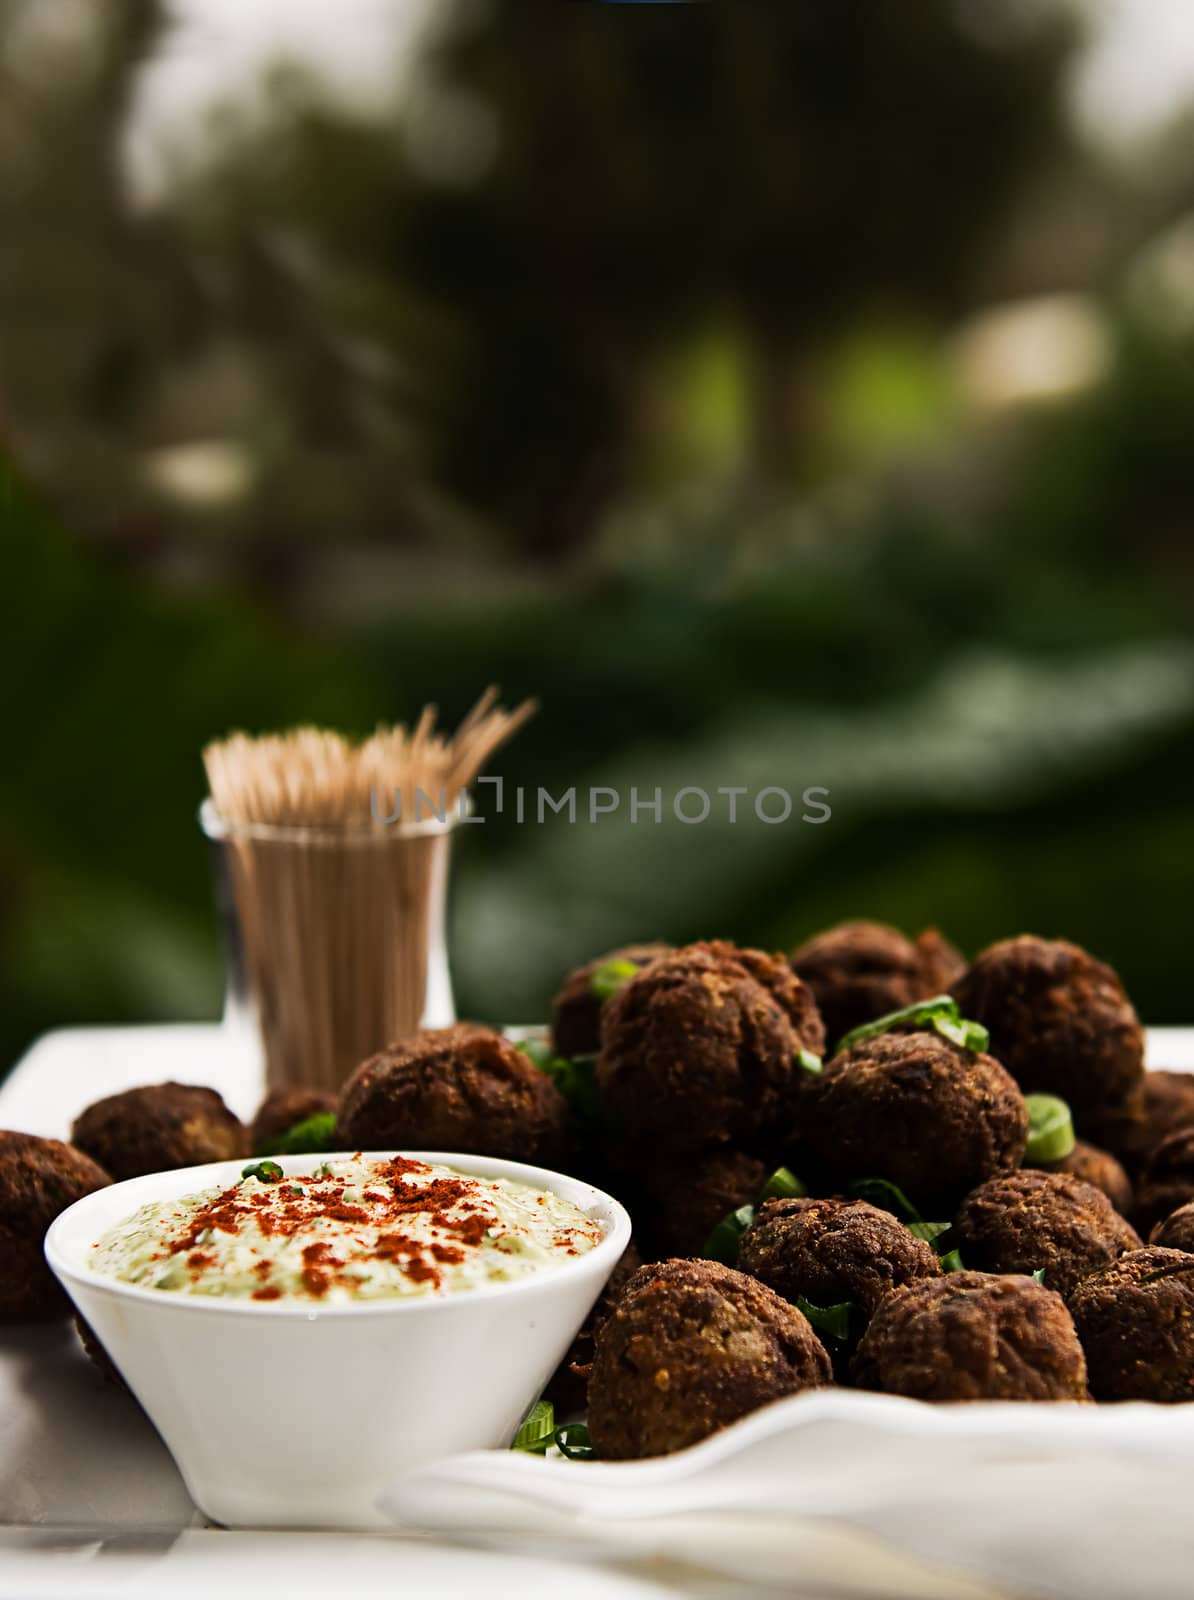 A platter of meatballs garnished with herbs, served on a platter with toothpicks and a dipping sauce.